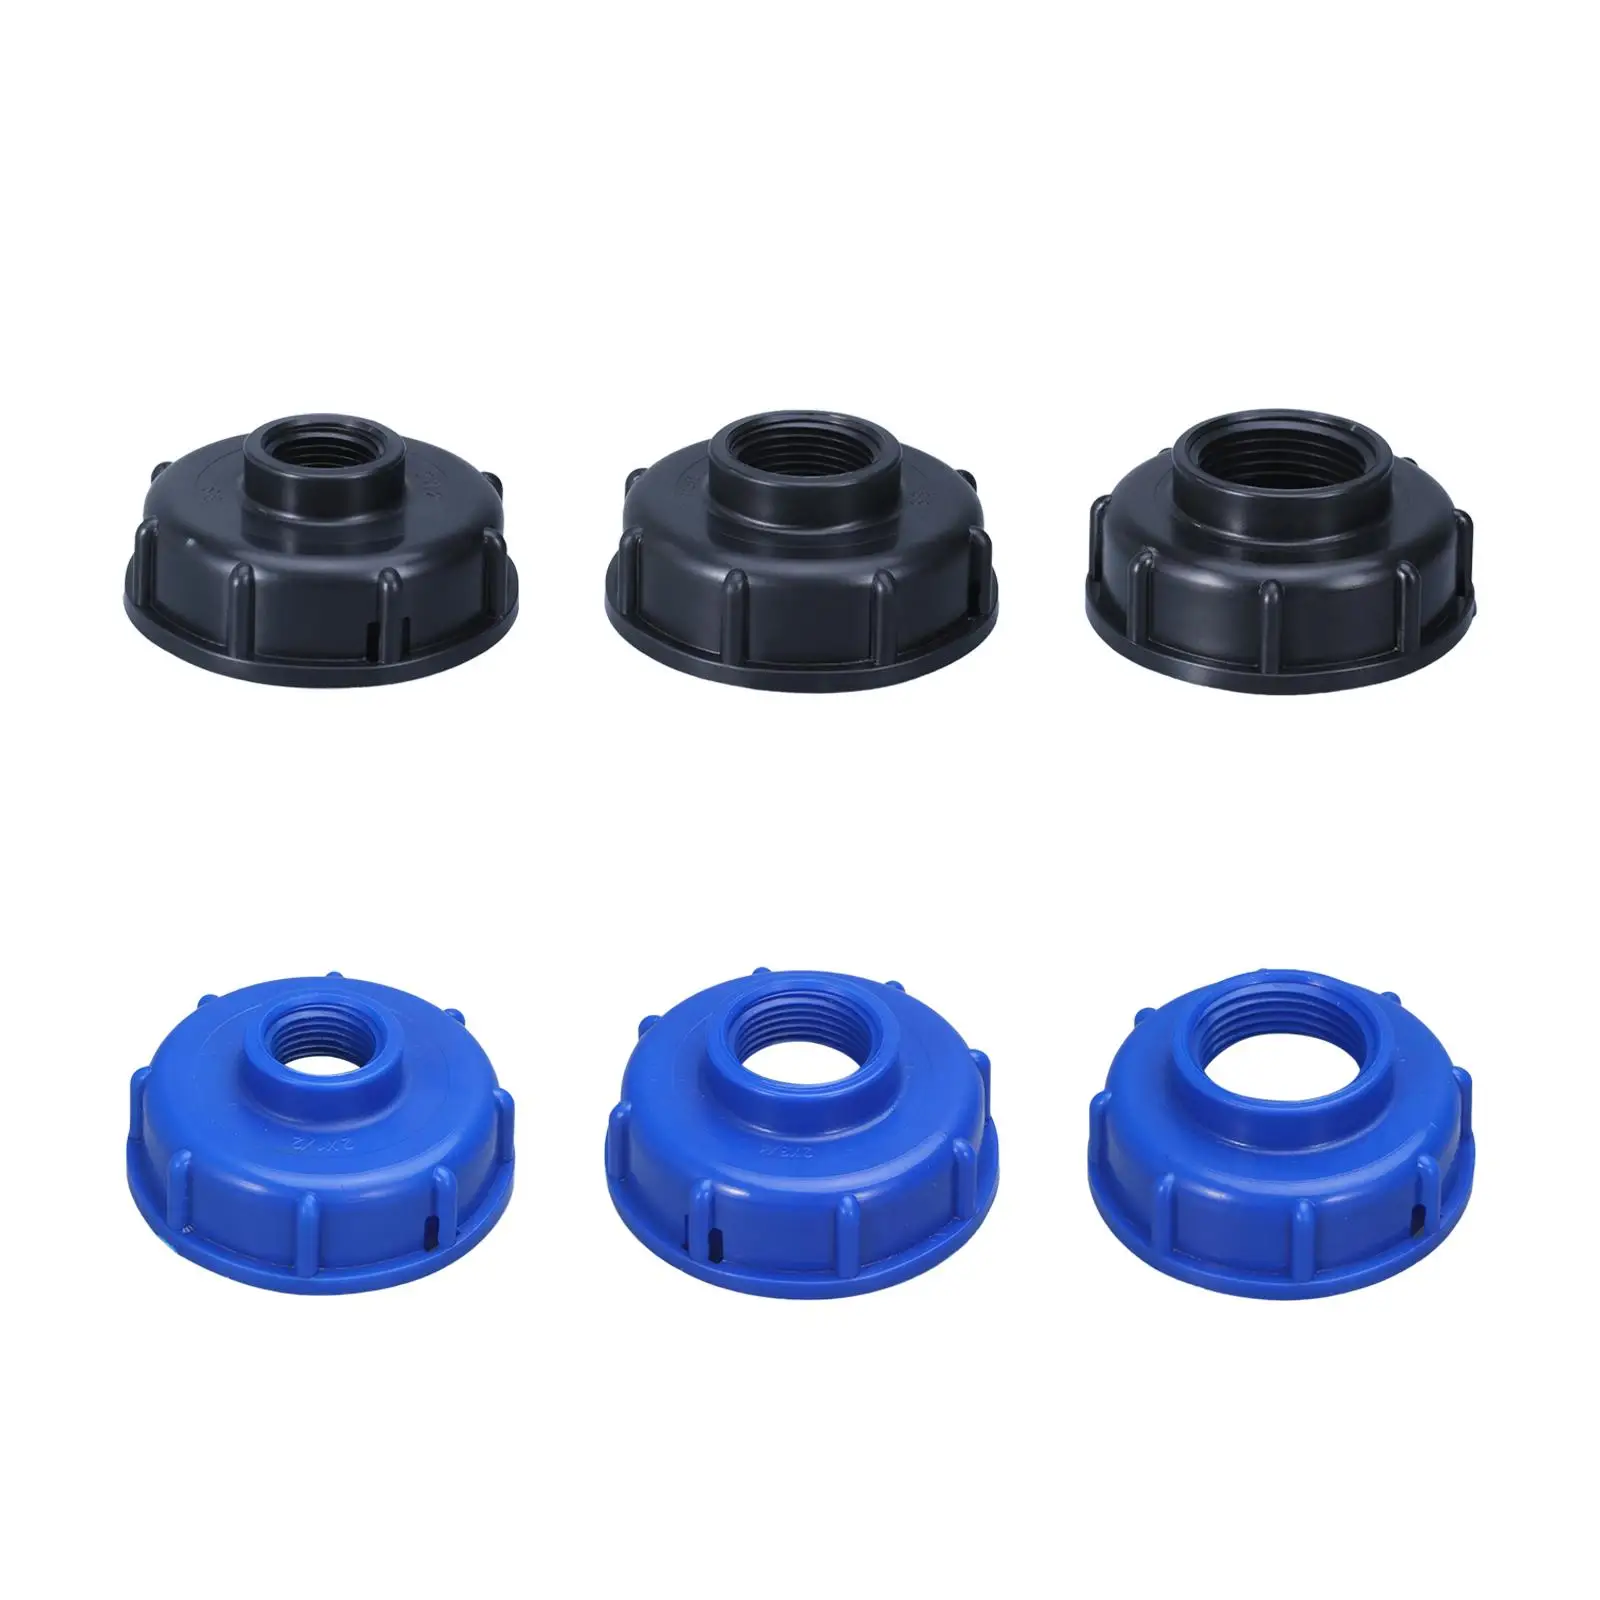 IBC Water Tank Fittings S60x6 Thread Garden Hose Connector for Water Tank Greenhouse Garden Watering Equipment Faucet Parts